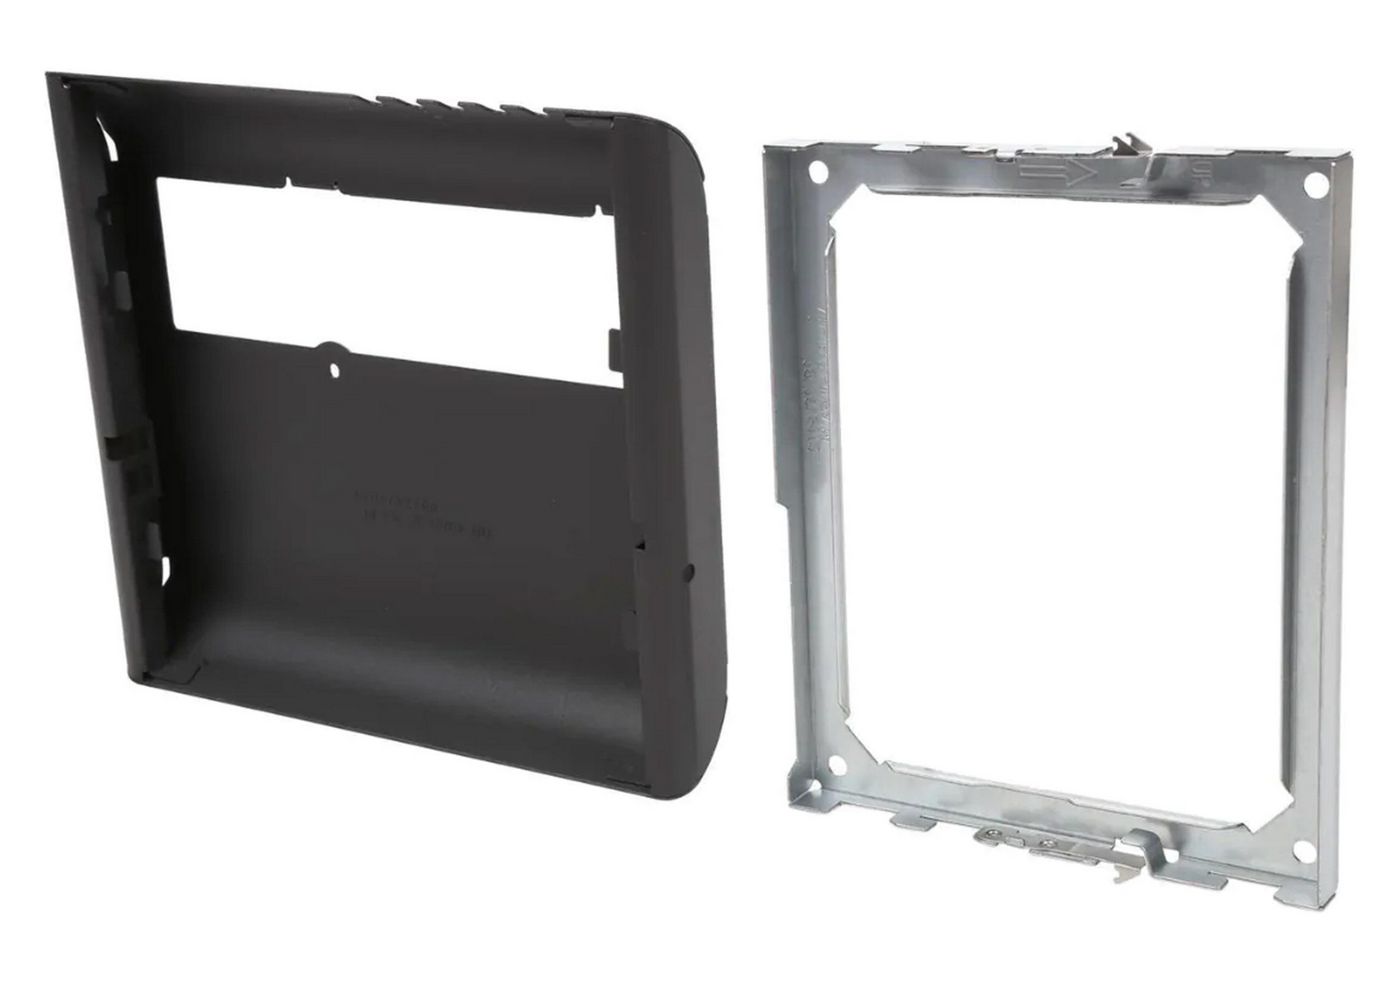 CISCO SYSTEMS WALL MOUNT KIT FOR CISCO